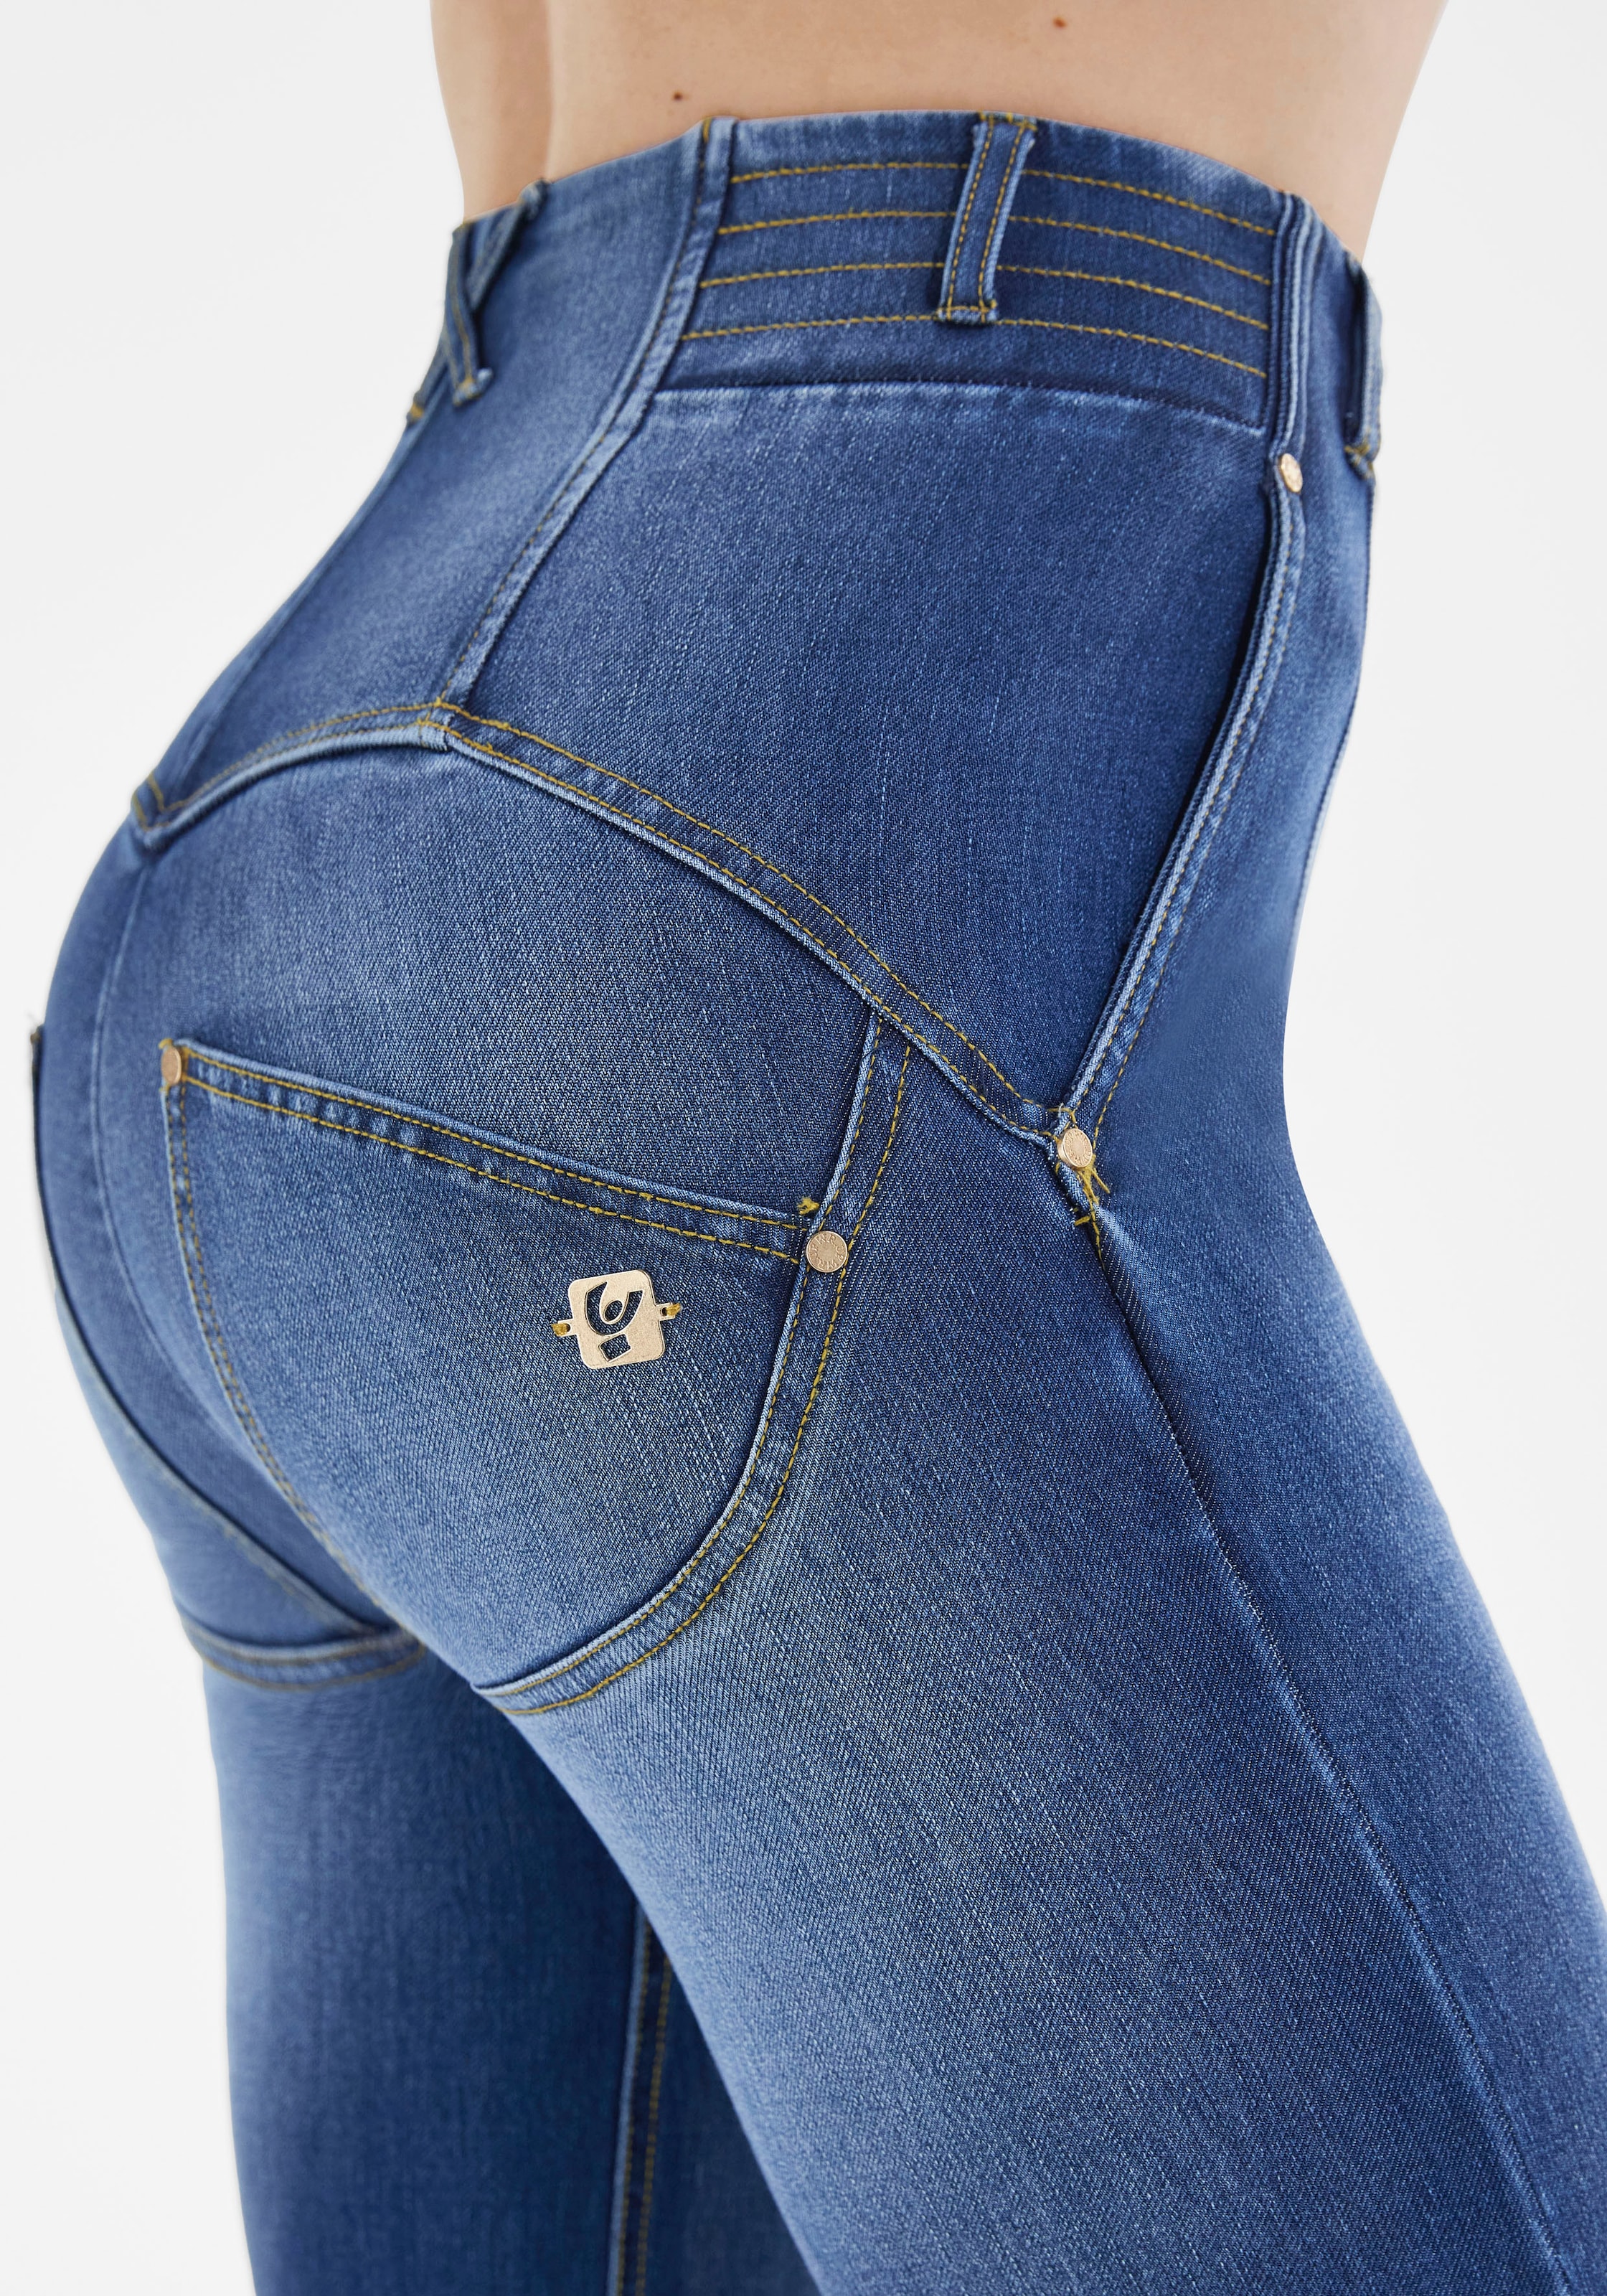 & Shaping Freddy Skinny-fit-Jeans OTTOversand SUPERSKINNY«, bei Lifting »WRUP mit Effekt